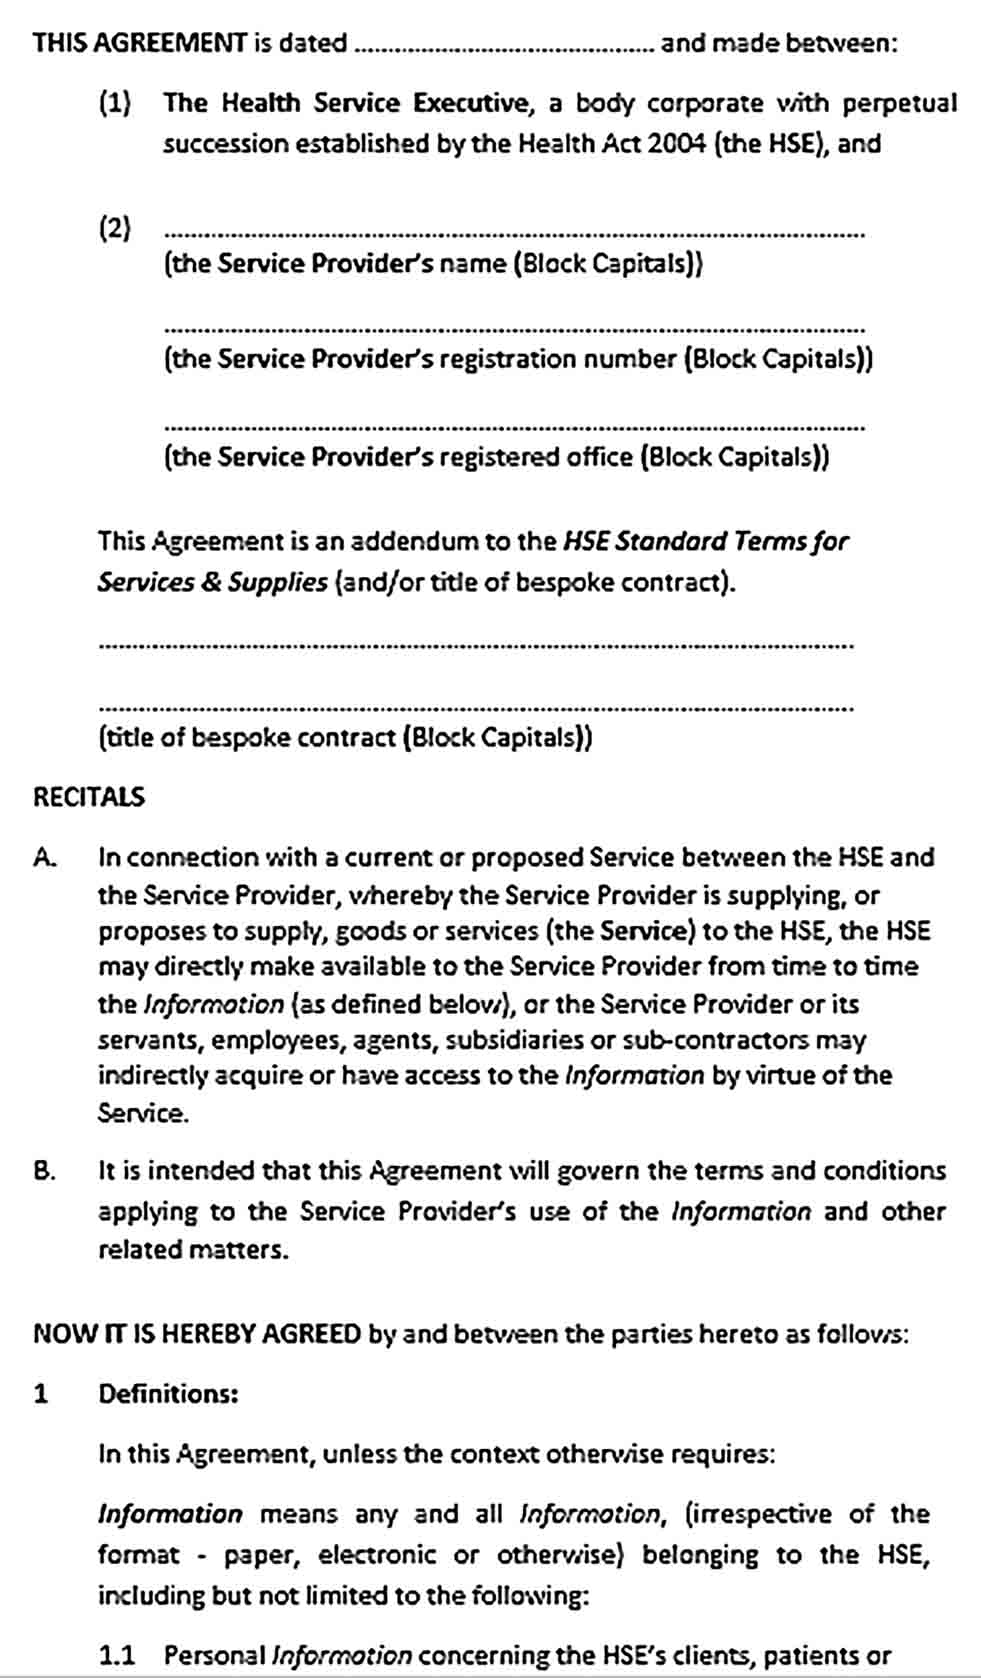 Sample Contractor Confidentiality Agreement for Data Service Provider